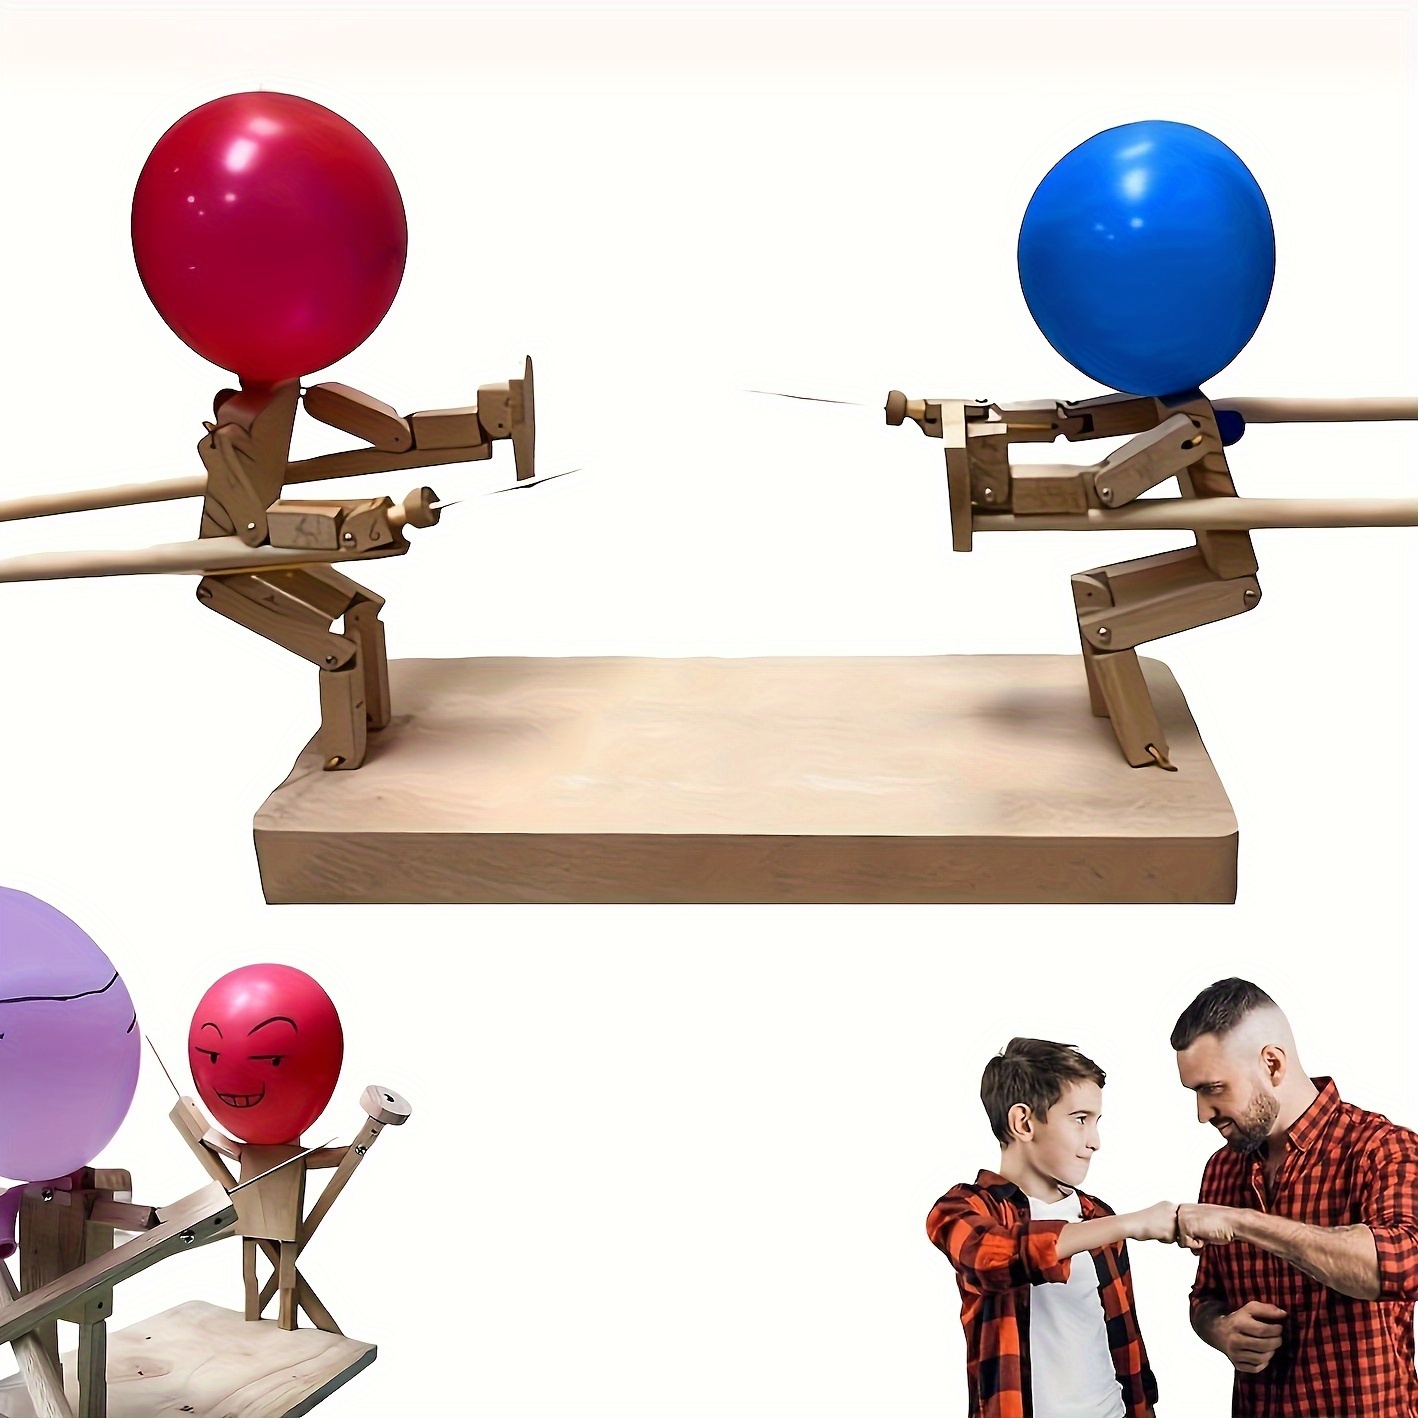 

Balloon Bamboo Man Battle, 2024 Newest Wooden Fencing Puppets, Wooden Bots Battle Game For 2 Players, Whack A Balloon Party Games (11.81inch*3mm)